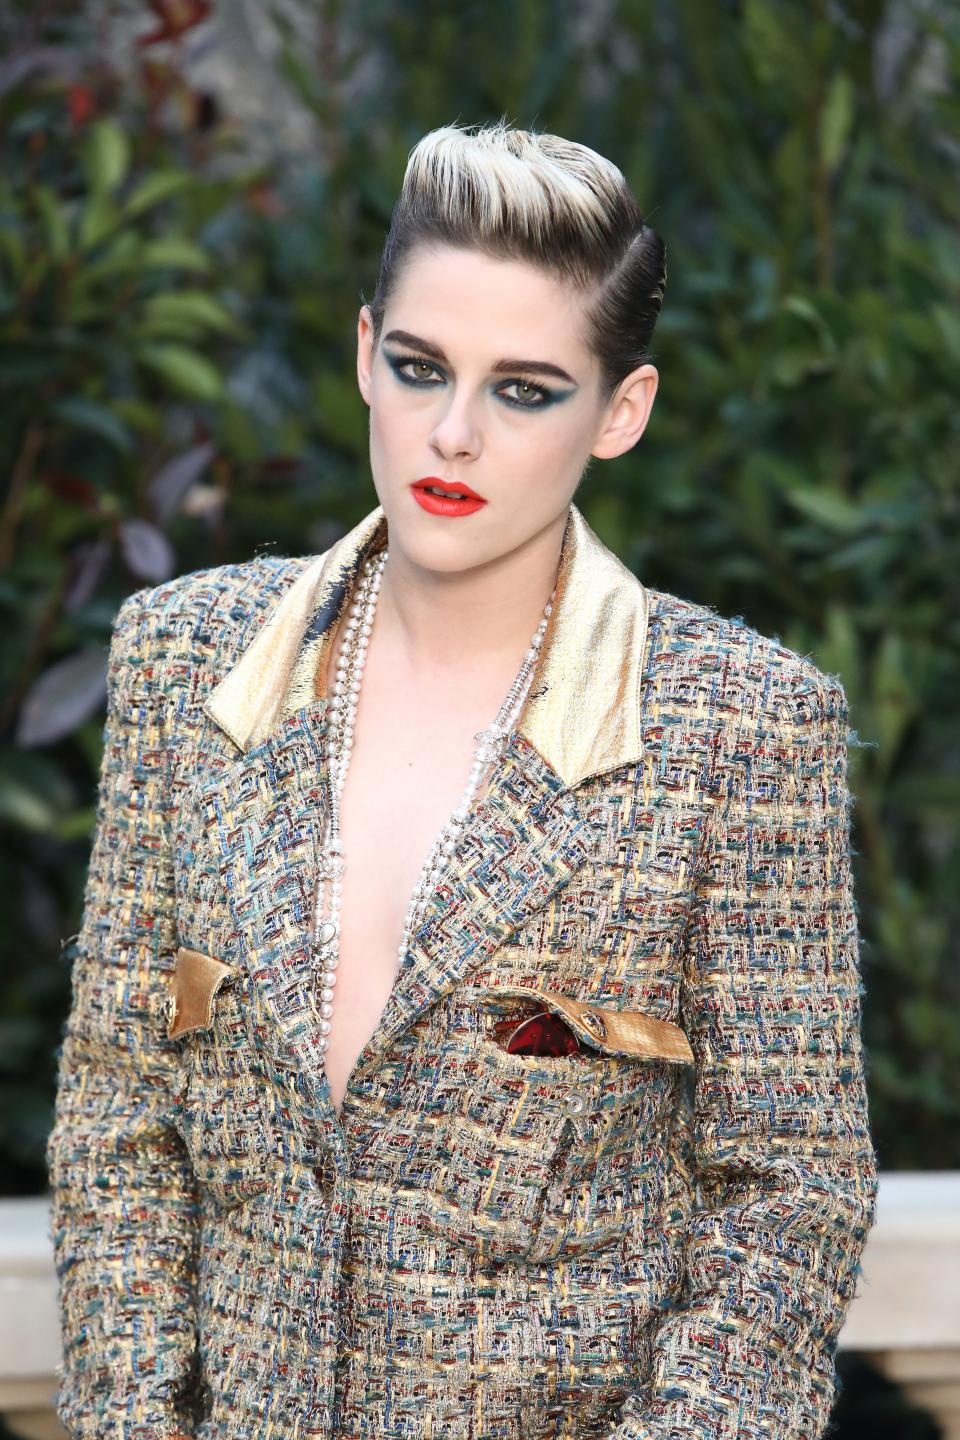 PARIS, FRANCE - JANUARY 22: Kristen Stewart attends the Chanel Haute Couture Spring Summer 2019 show as part of Paris Fashion Week  on January 22, 2019 in Paris, France. (Photo by Julien M. Hekimian/Getty Images for Chanel)